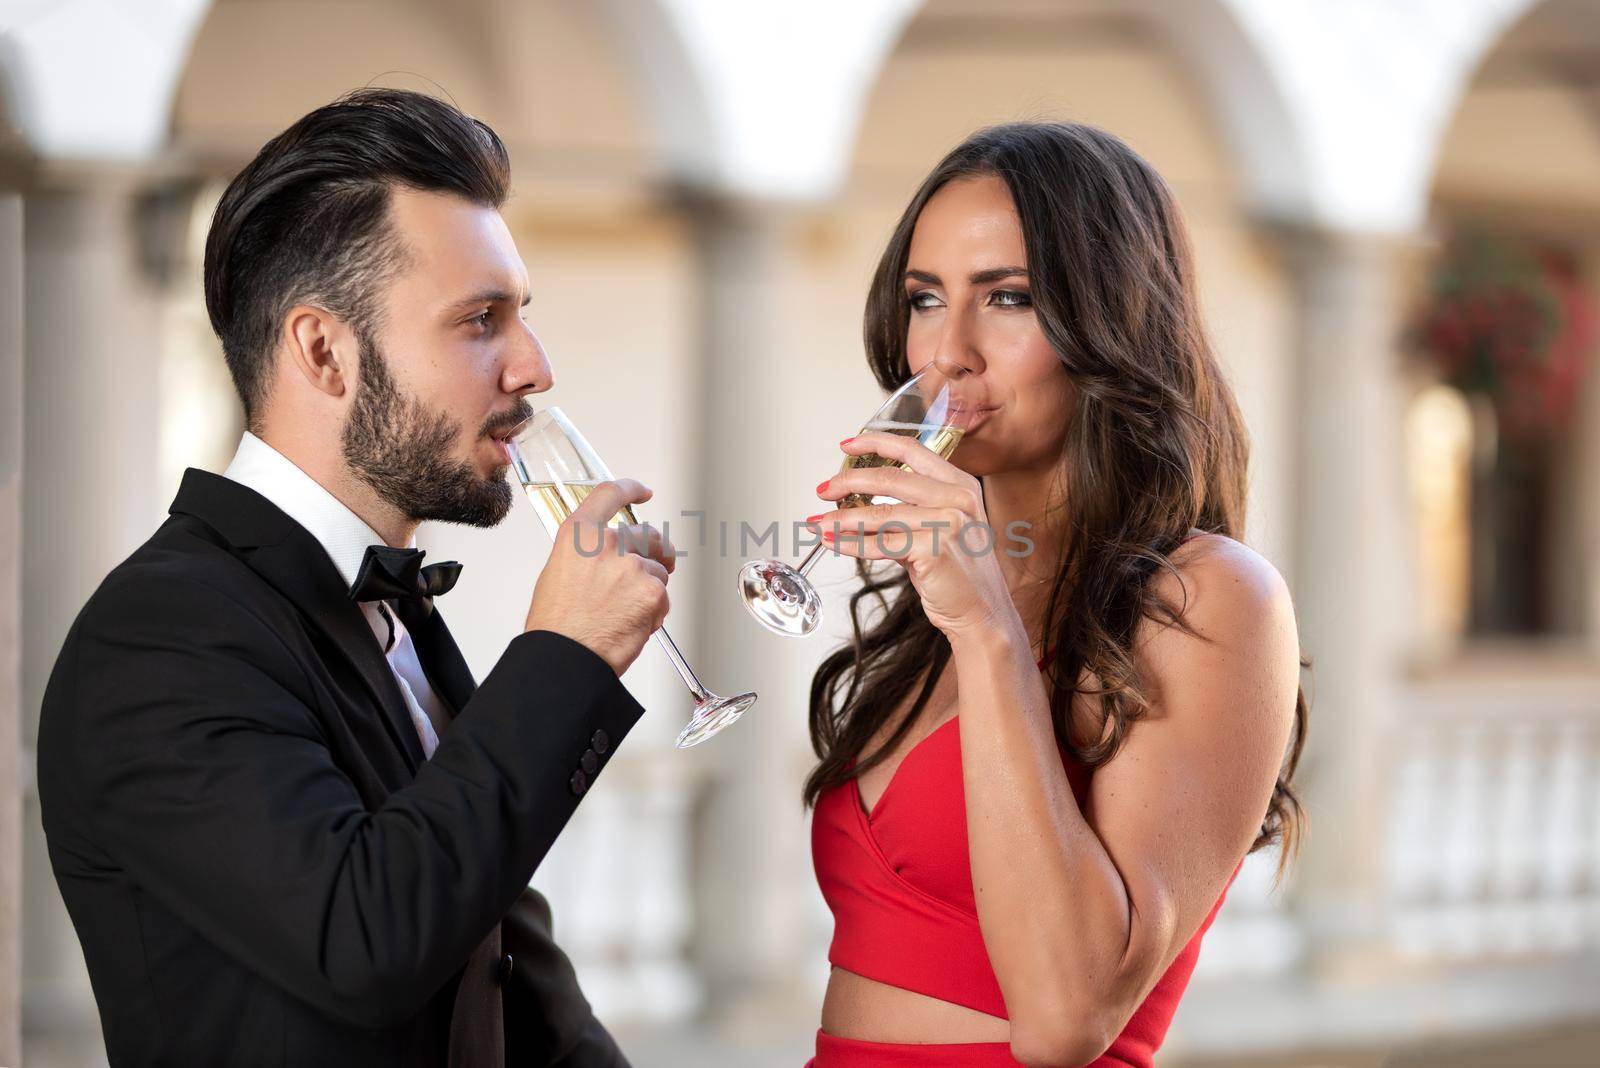 Couple drinking champagne by wdnet_studio